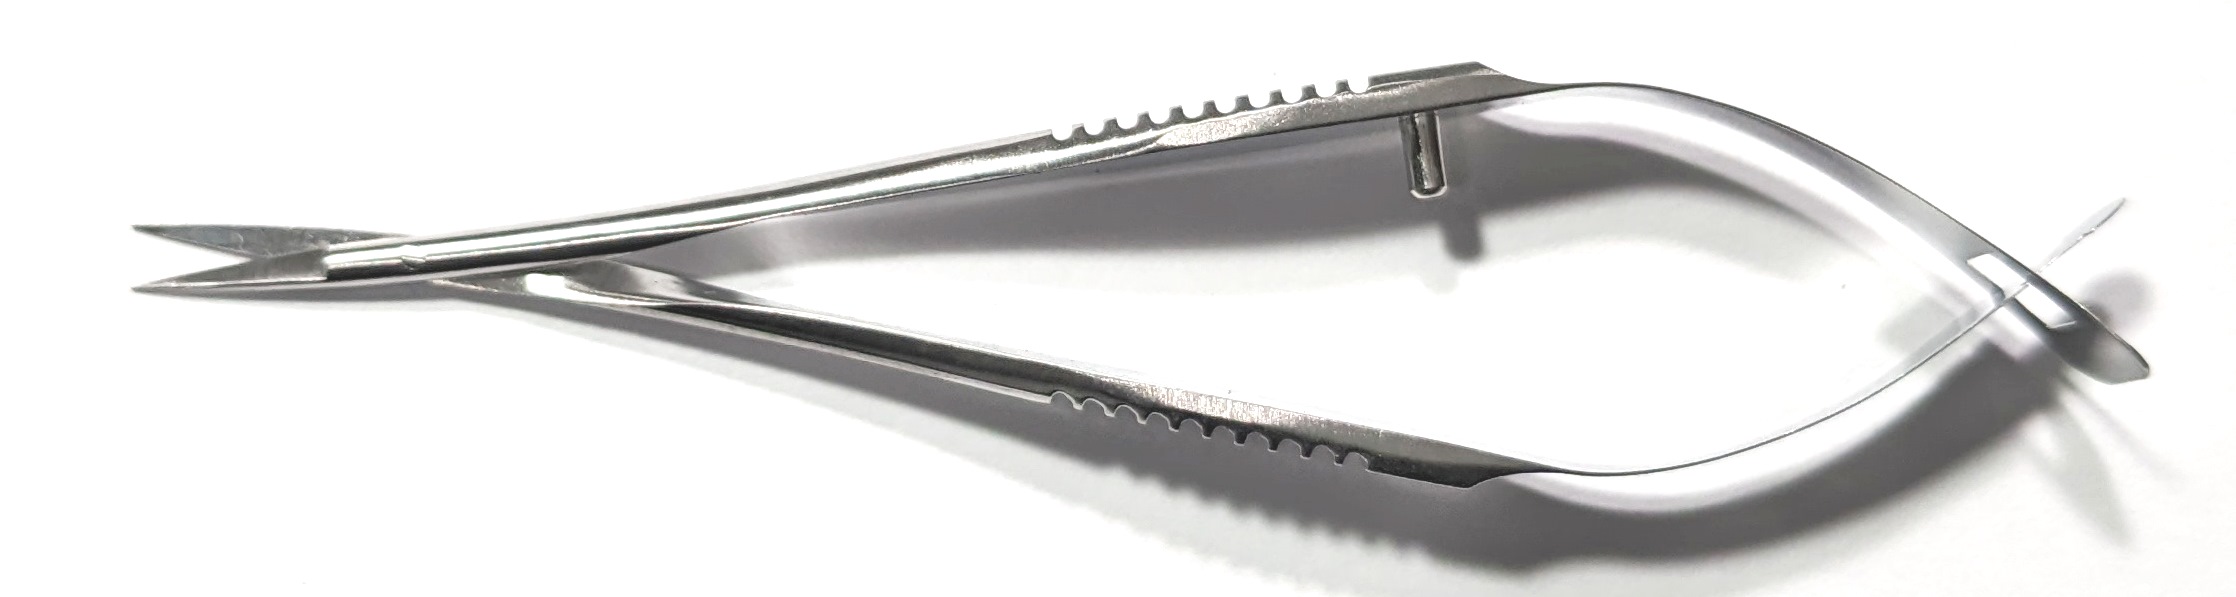 Micro dissecting spring scissors with 0.15x7.5mm straight blades